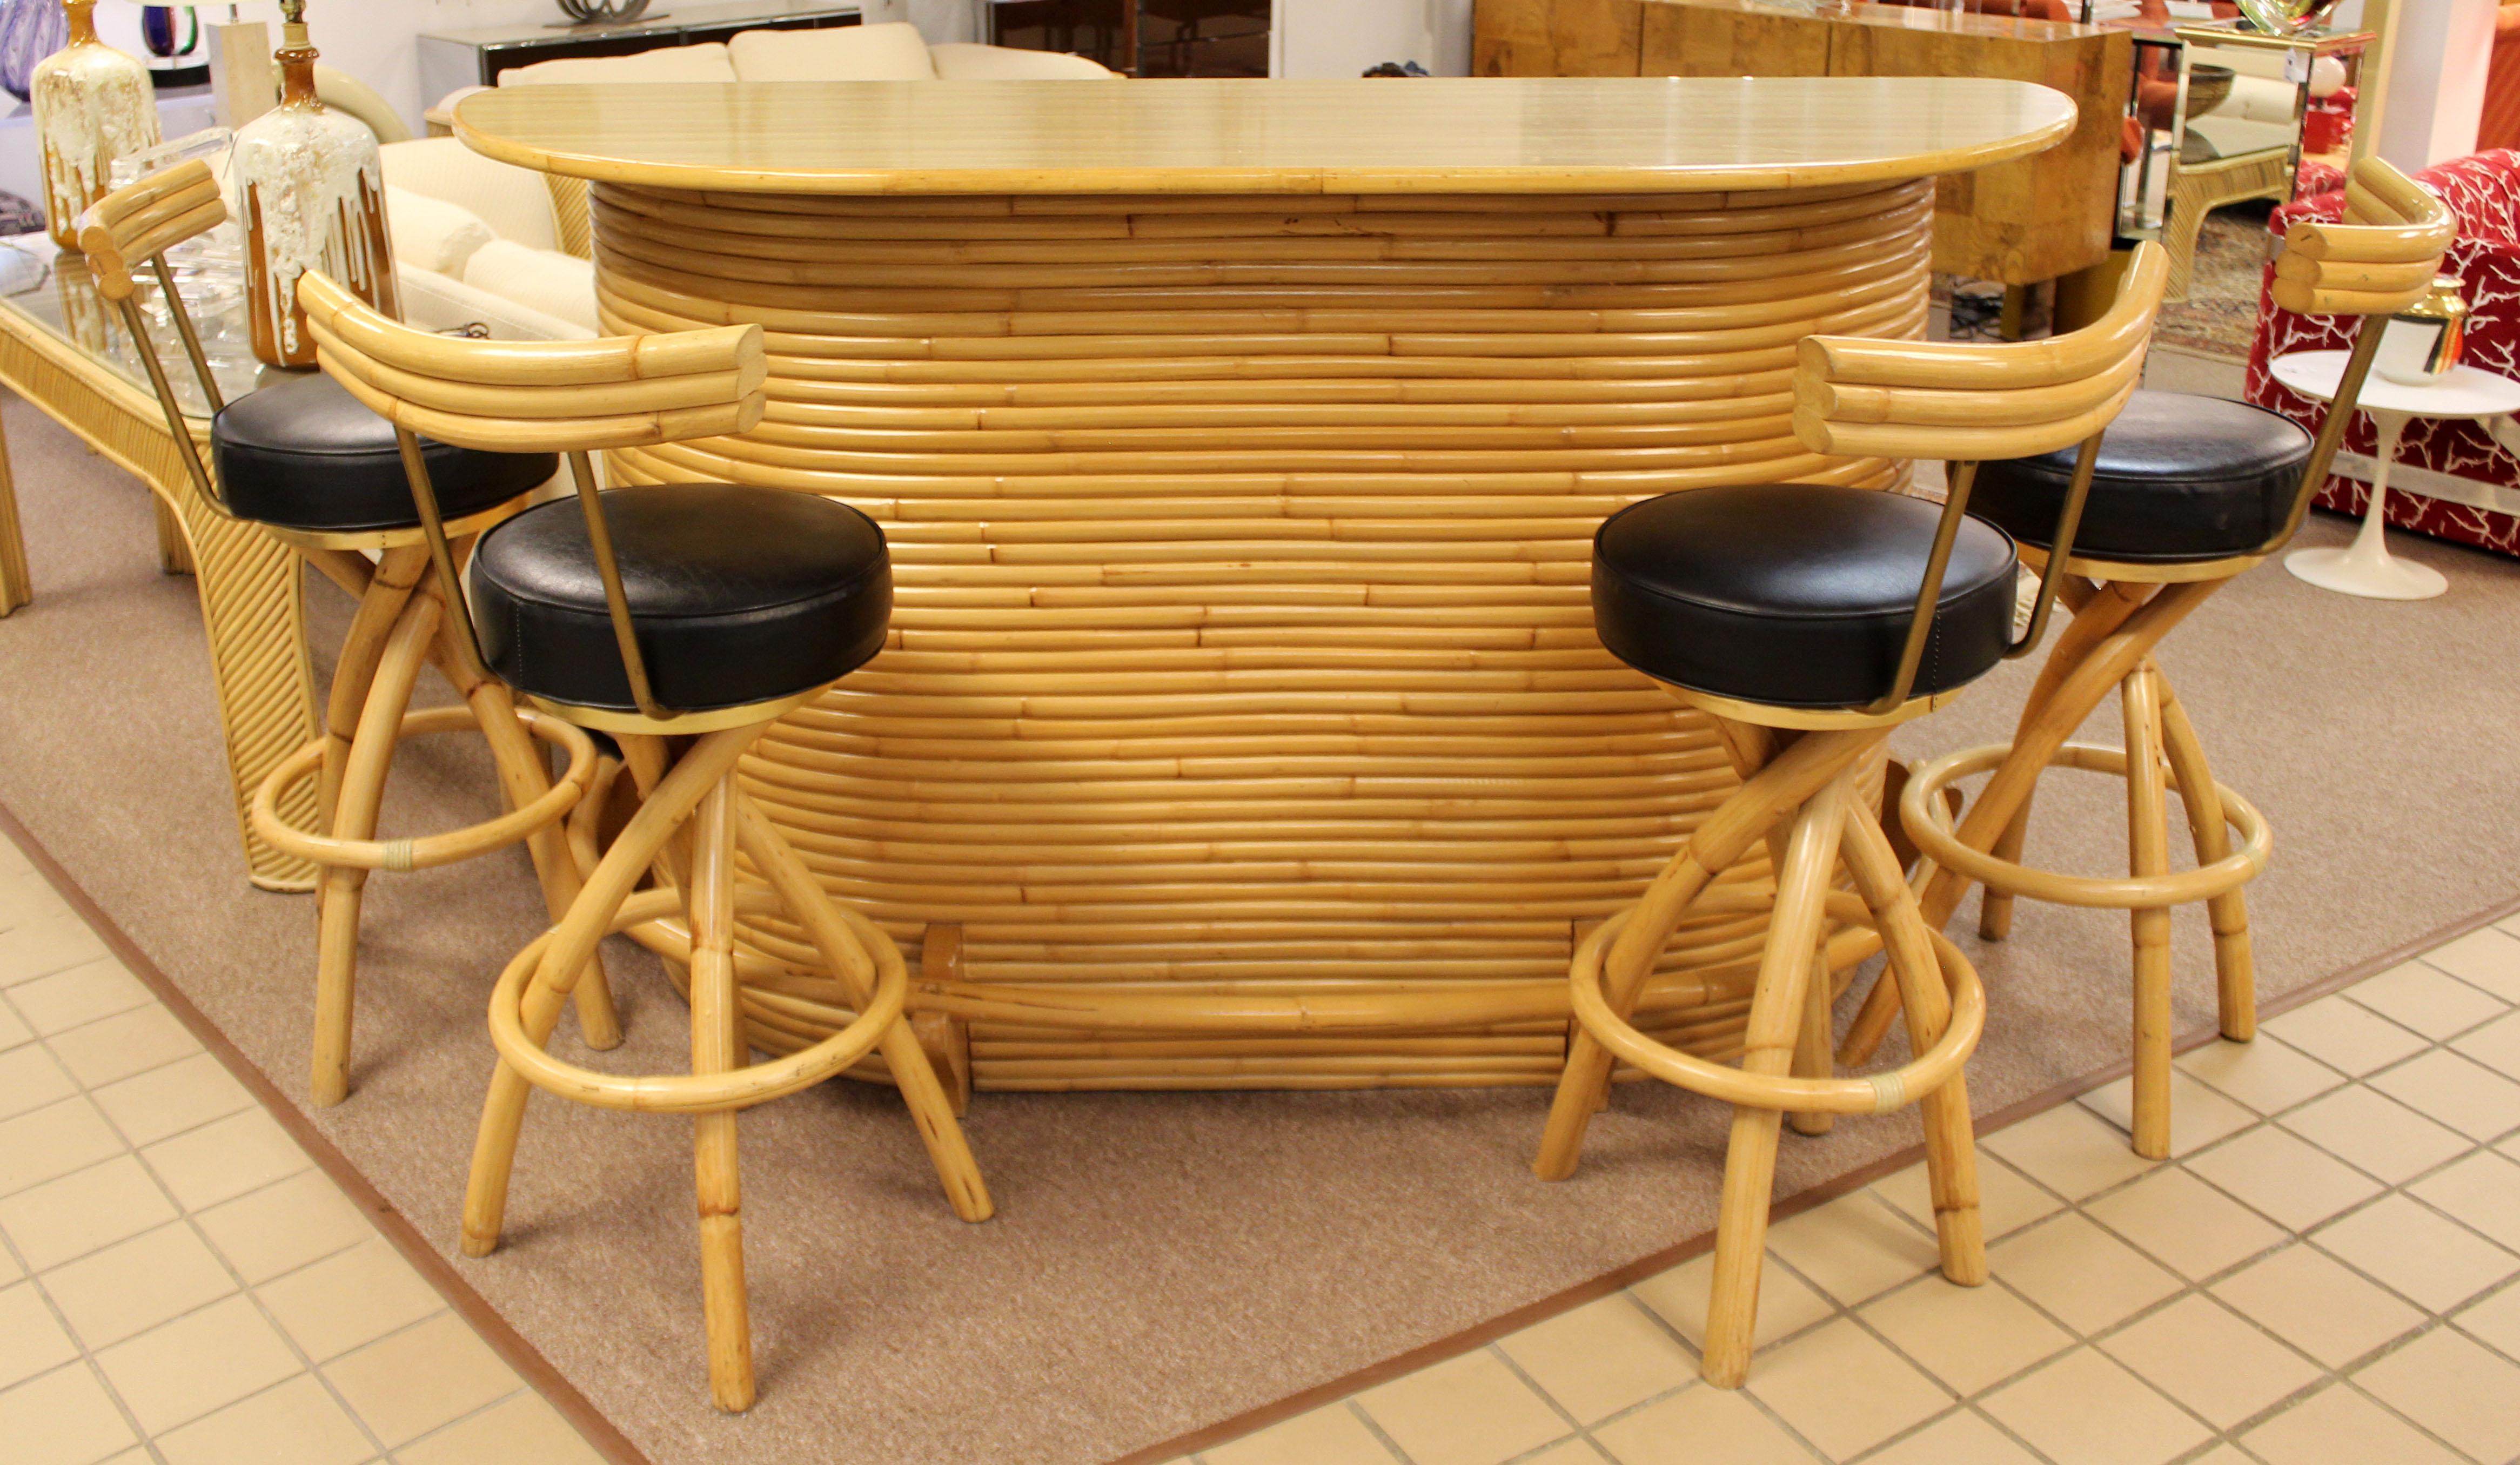 For your consideration is a fantastic, curved split reed bamboo bar, with a set of four matching arched rattan bar stools, with black leather padded swivel seats. In very good vintage condition. The dimensions of the bar are 72.5